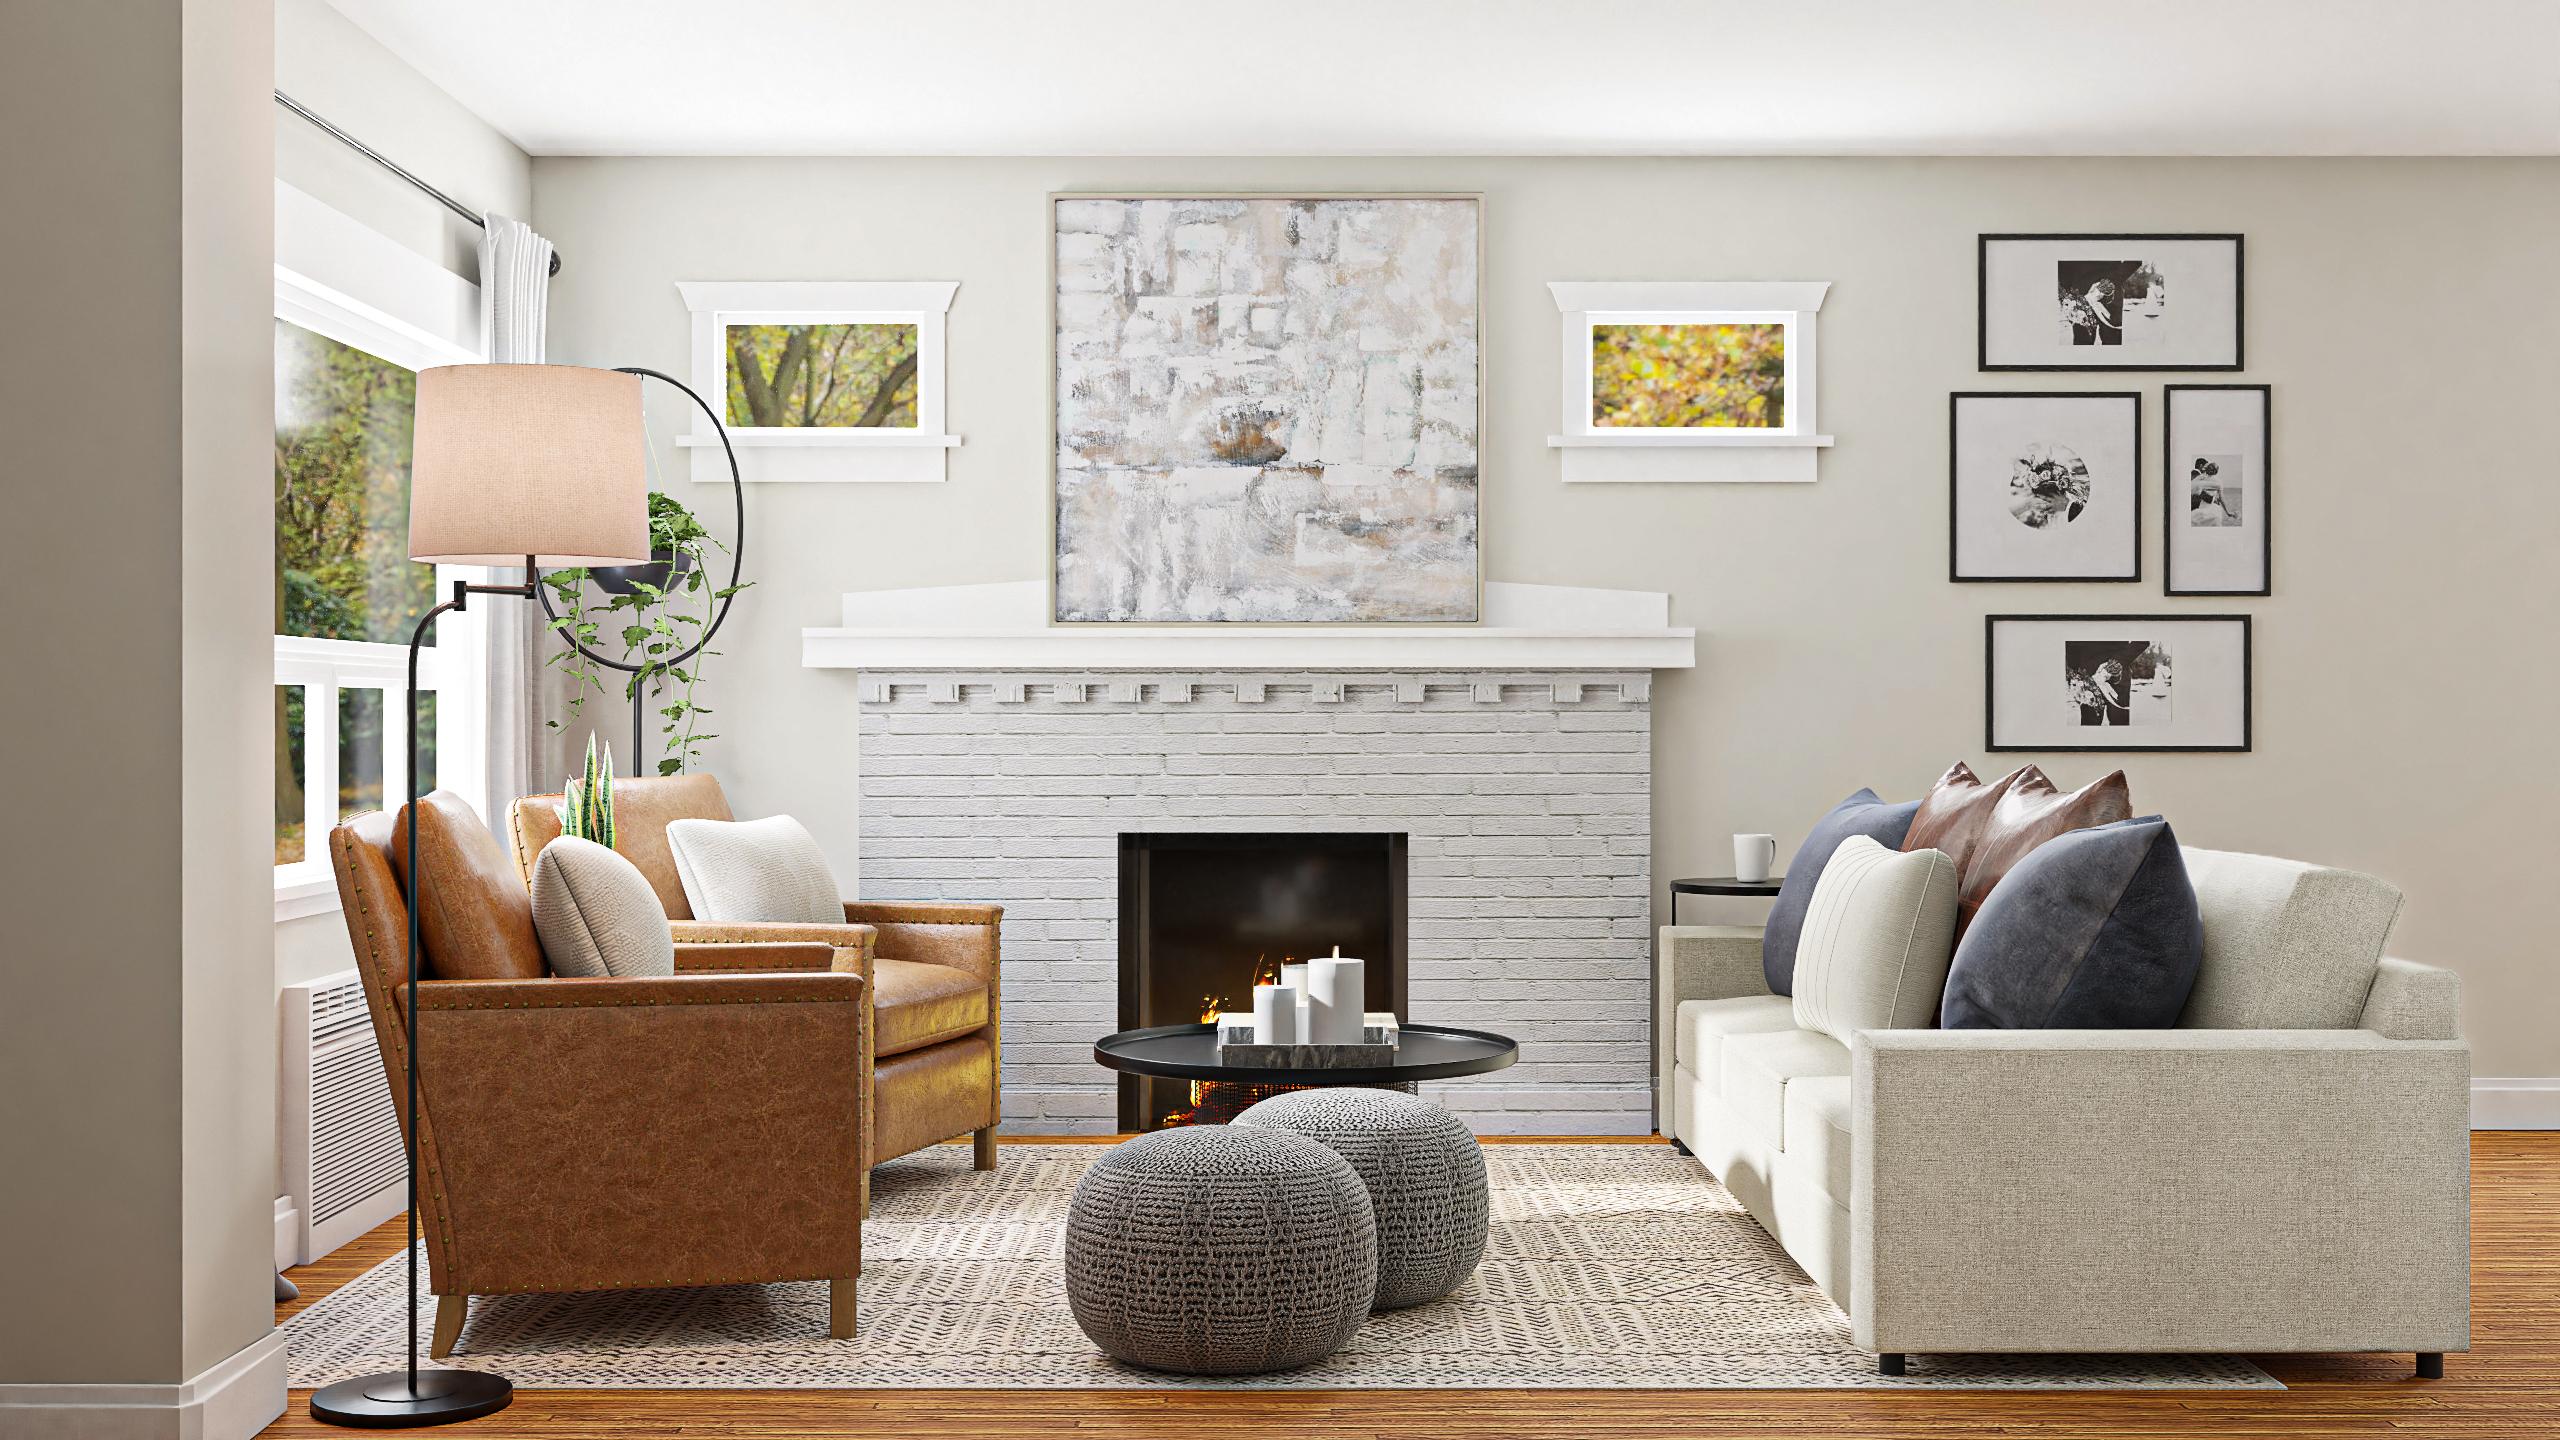 Patterned Rug: Transitional Living Room with Modern Accents